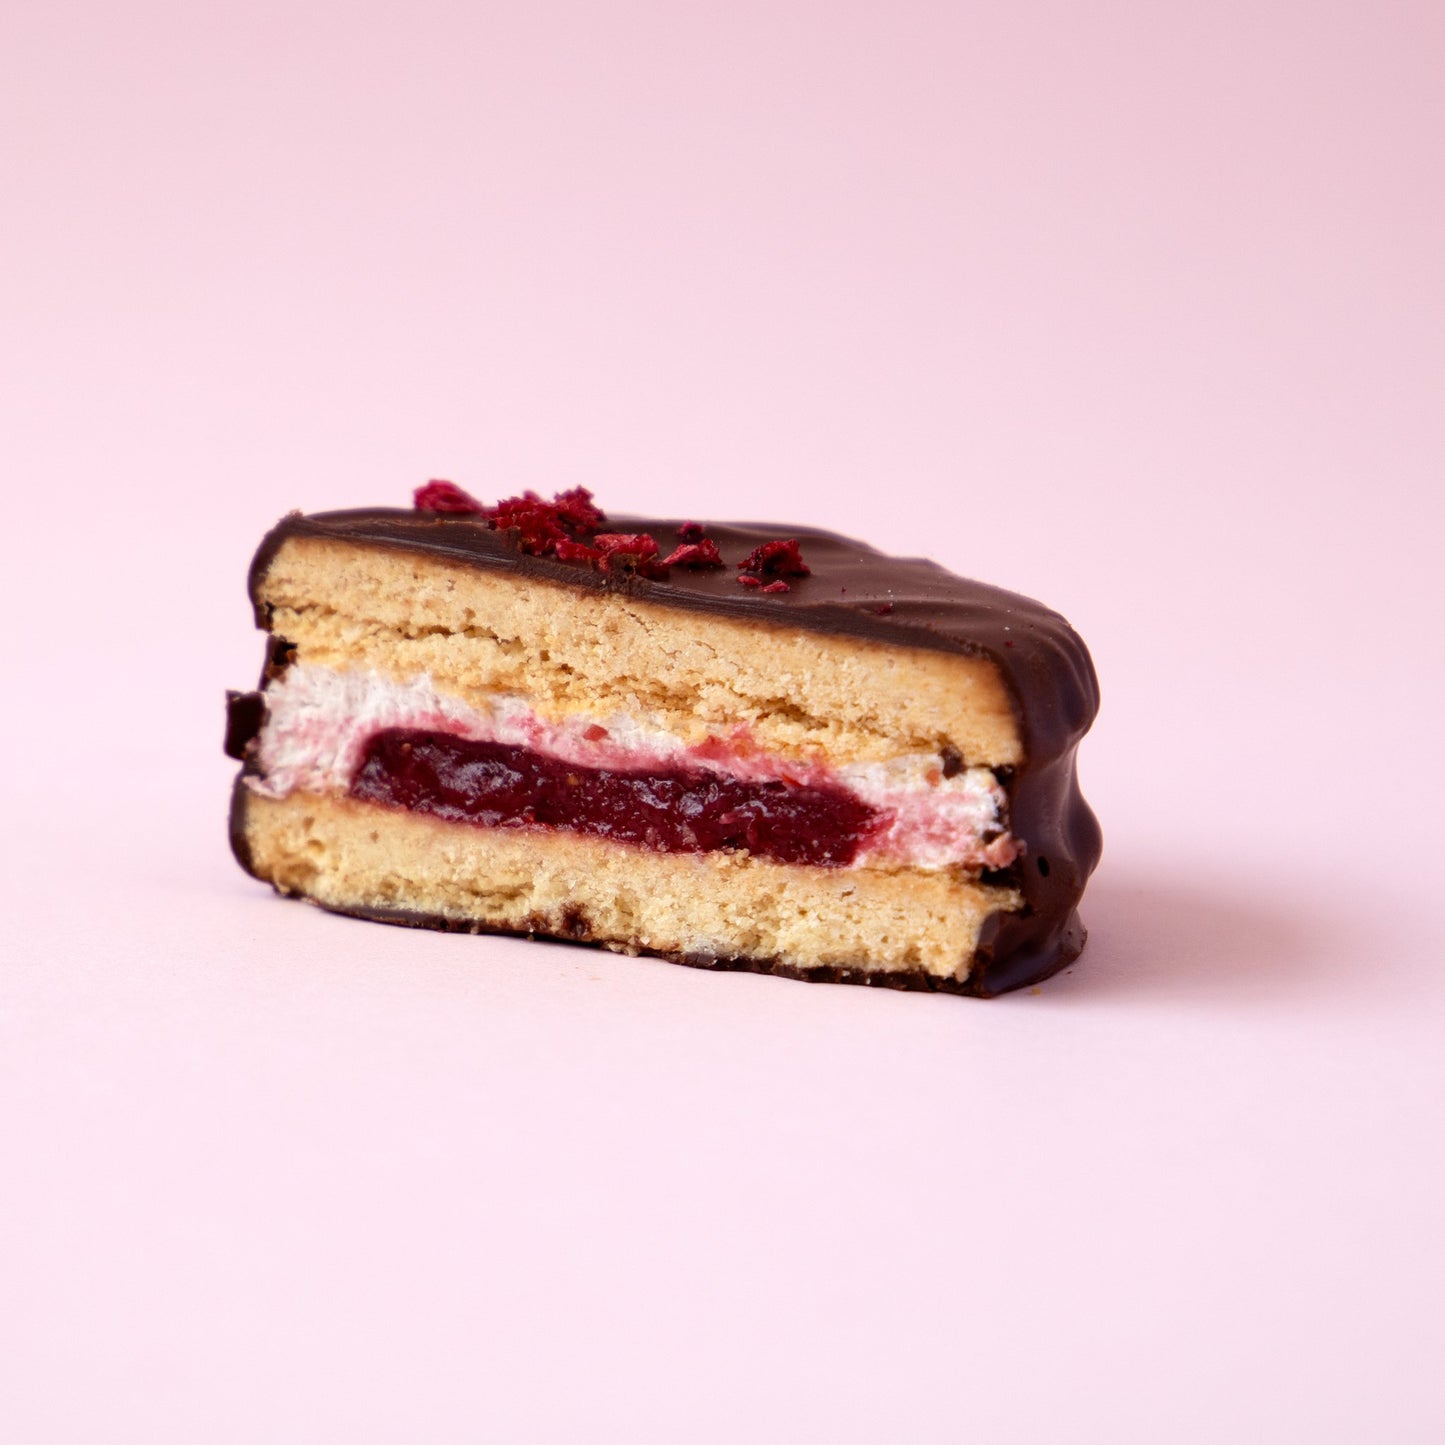 raspberry jam and marshmallow filled biscuits coated in chocolate